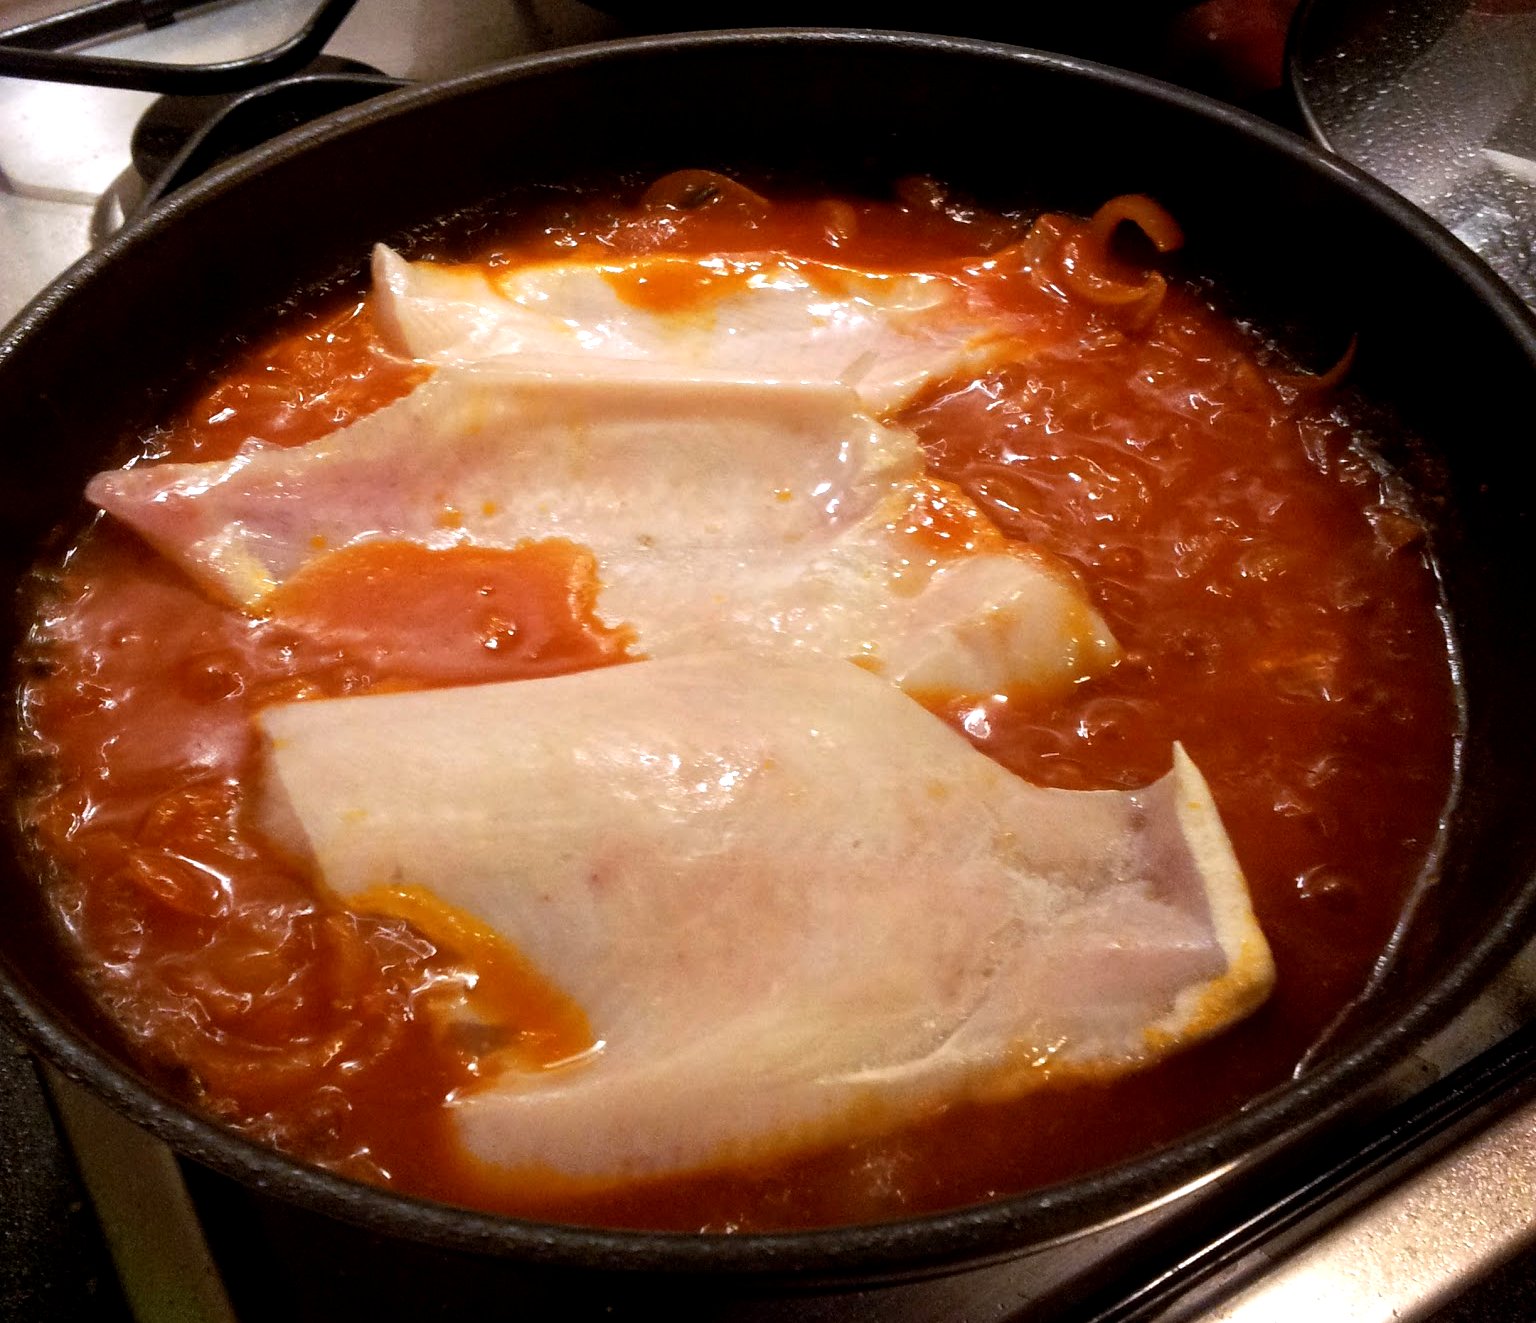 Plaice fillets in the pan